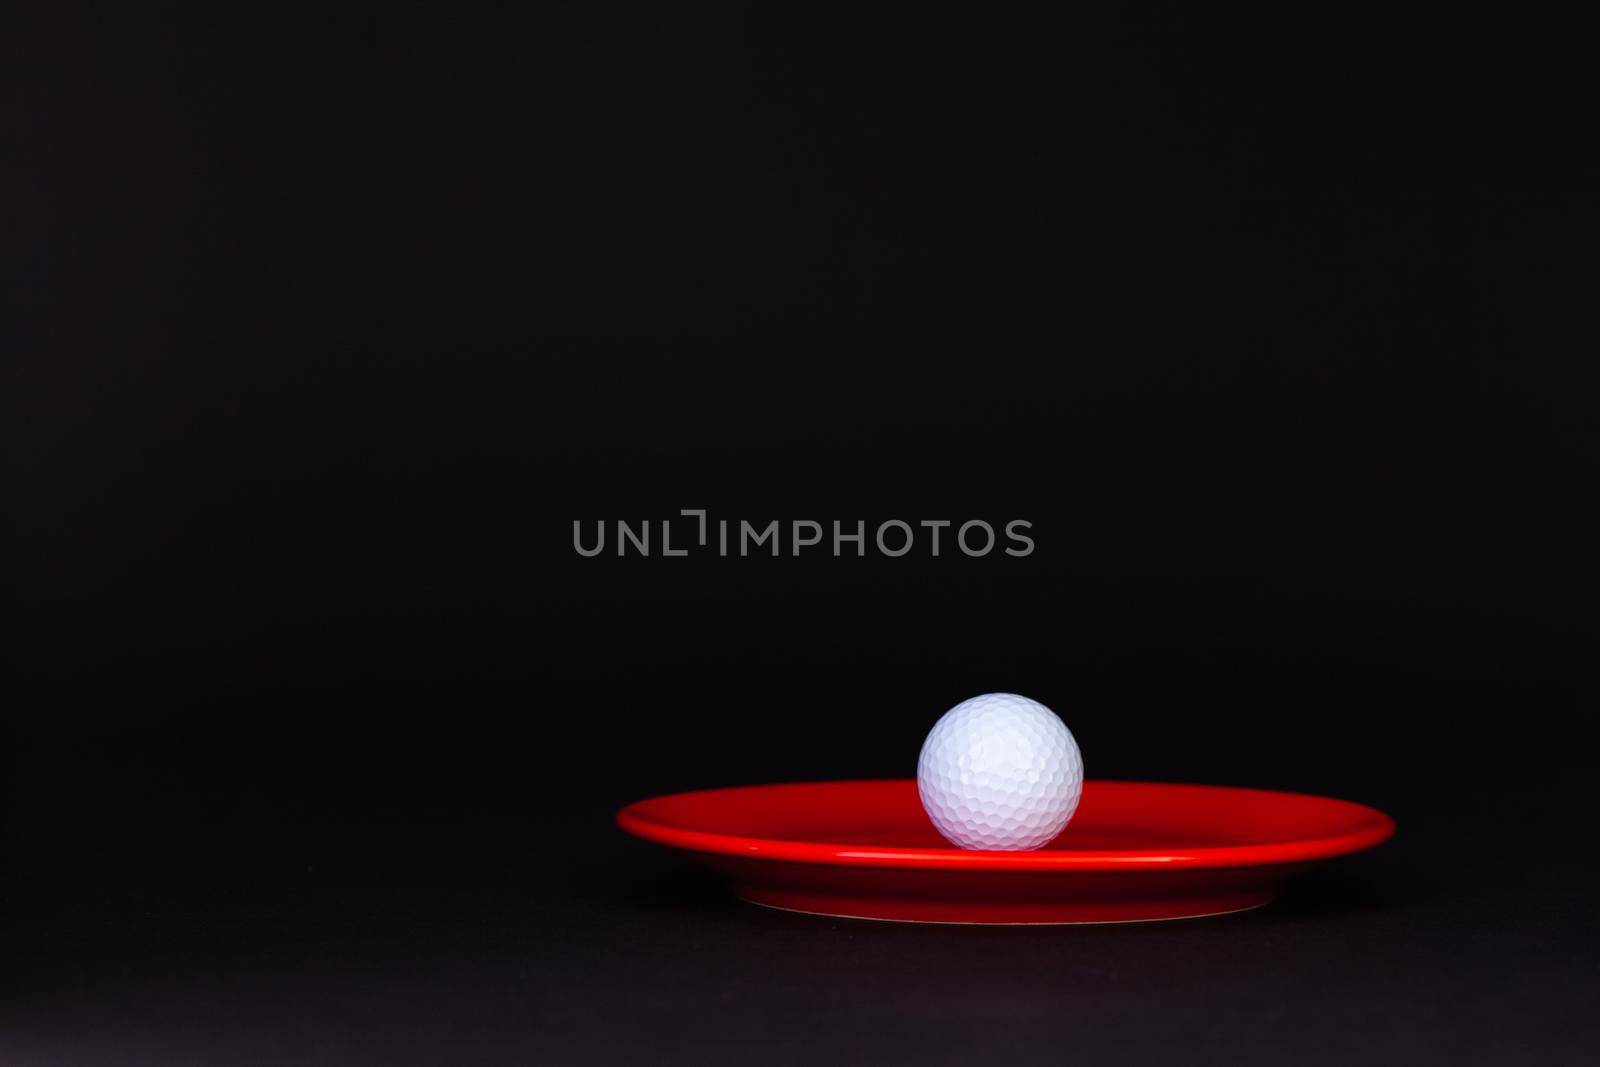 Red plate and golf ball on the black background